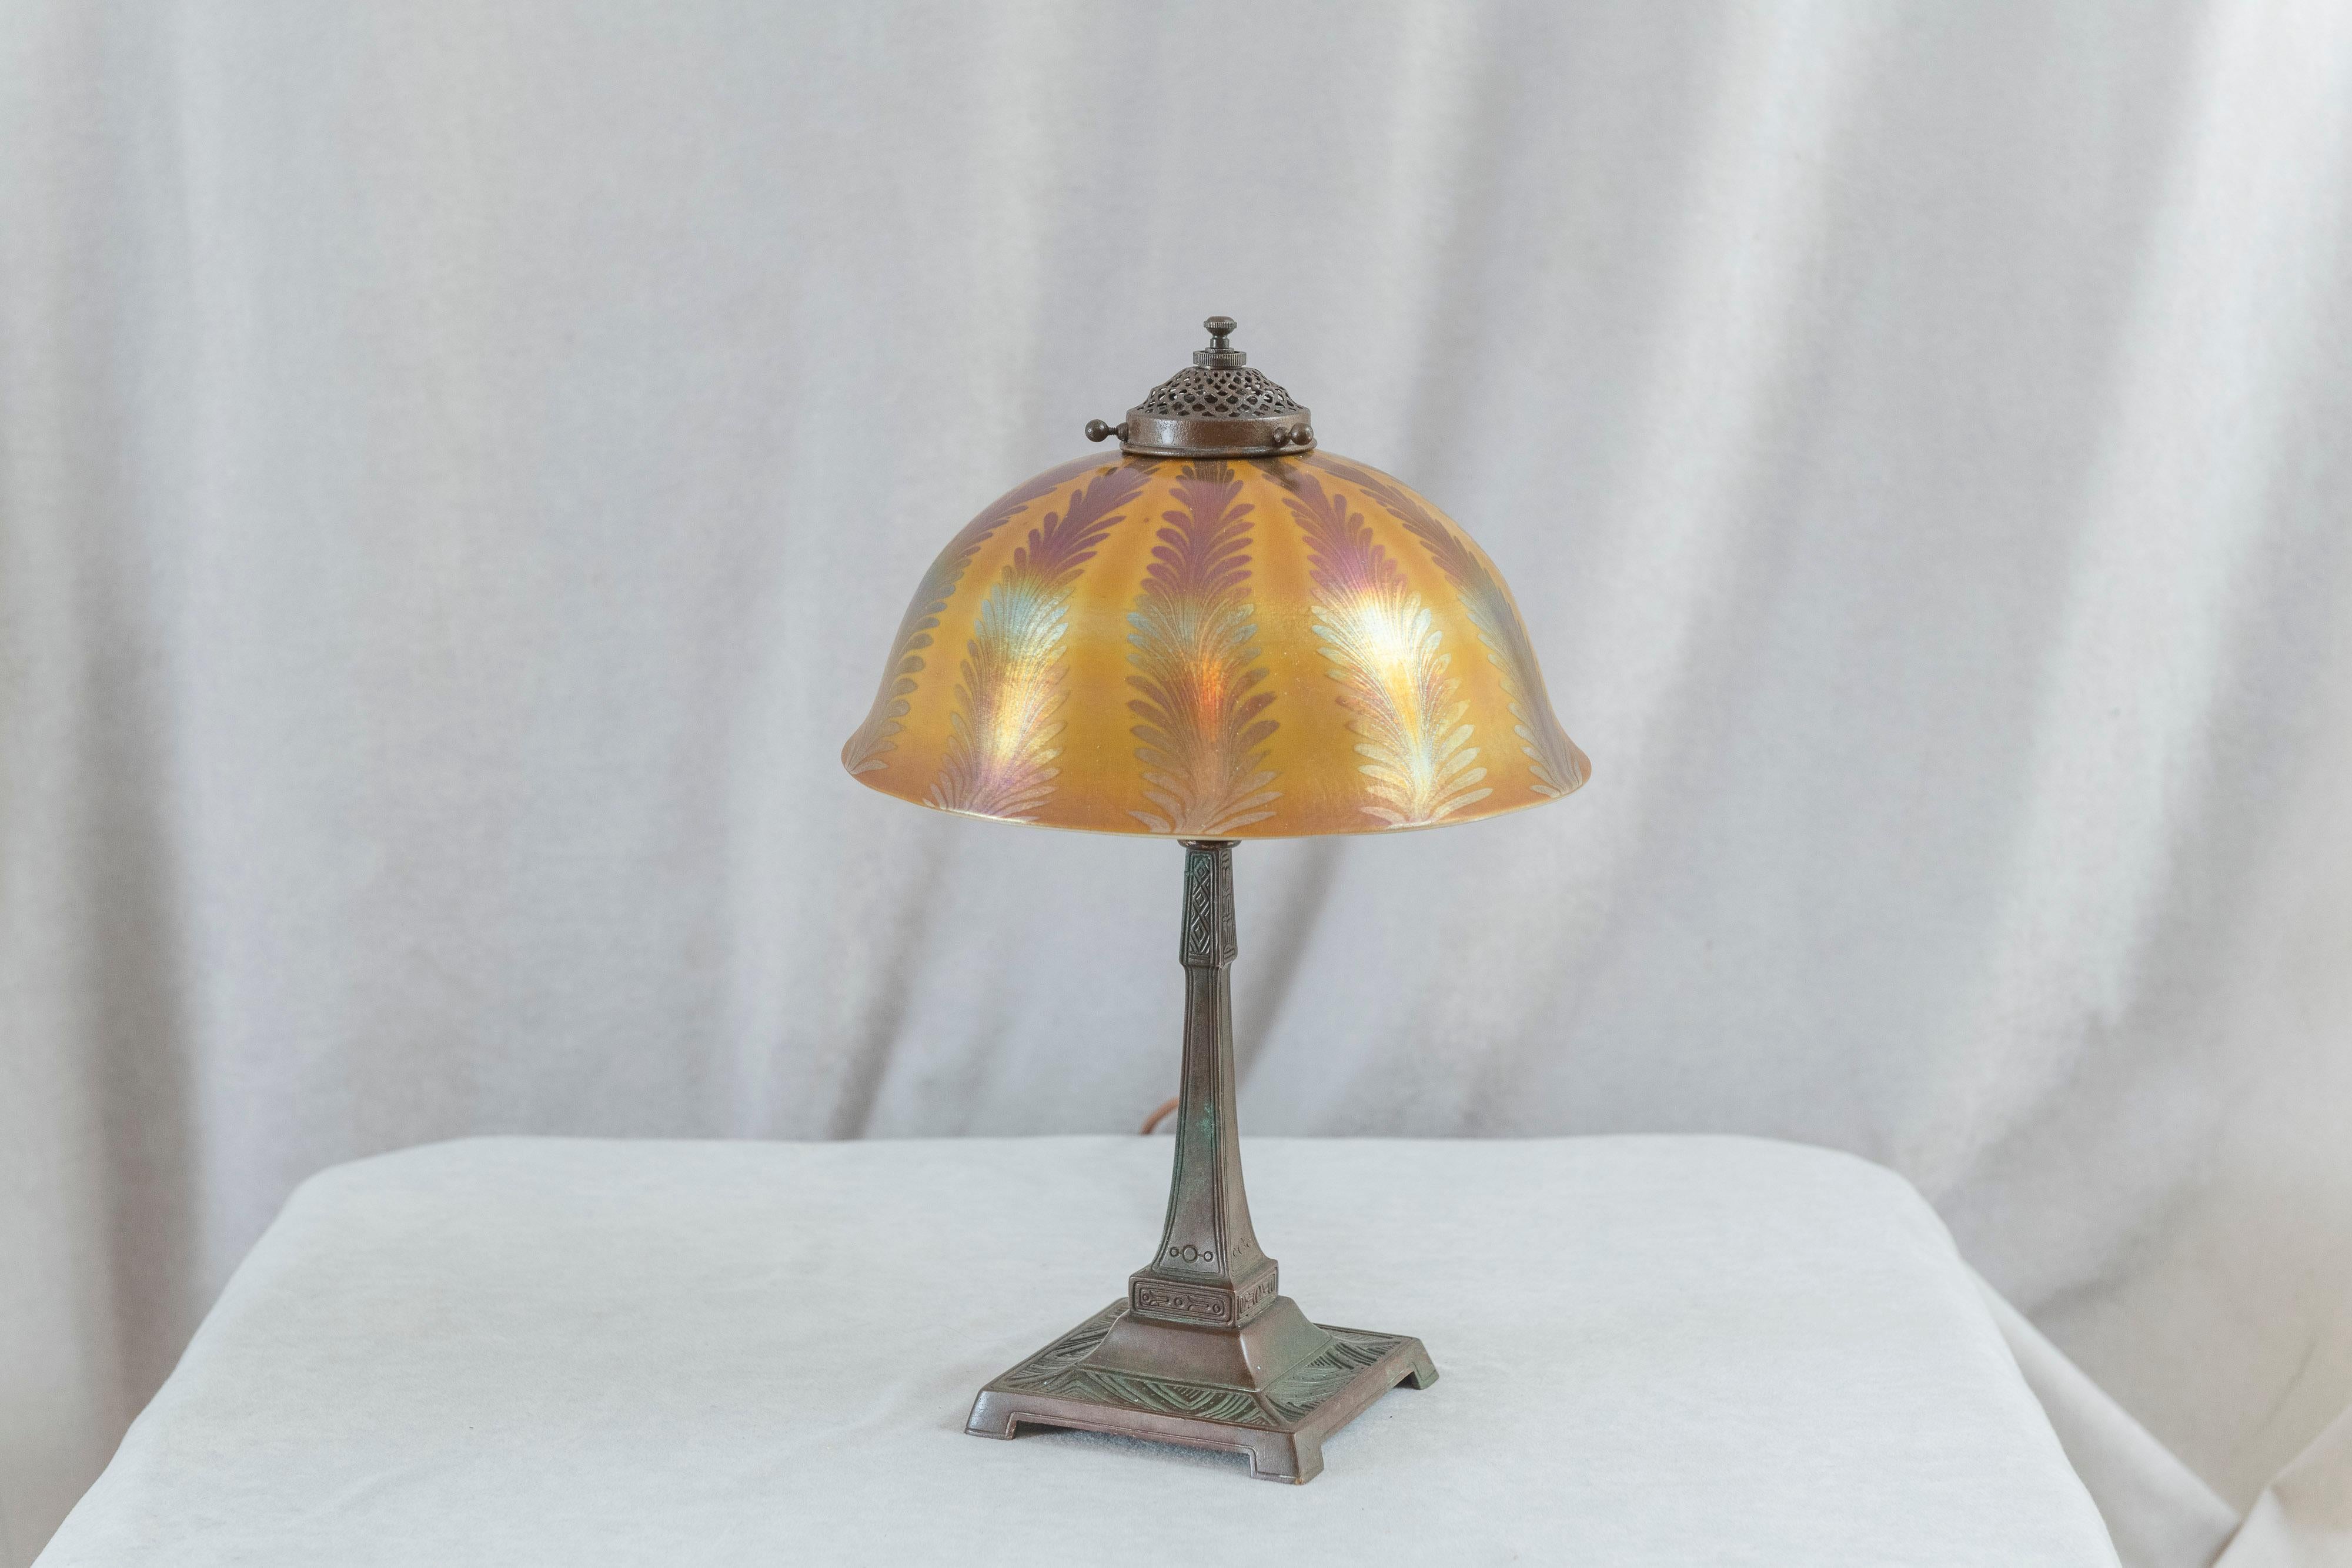  This lovely little Tiffany lamp can be put almost anywhere in your home. The  bronze base has a rich warm brown patina. The hand blown shade is beautiful and colorful. White lined keeping an opaque look and so the lightbulb is not visible. The